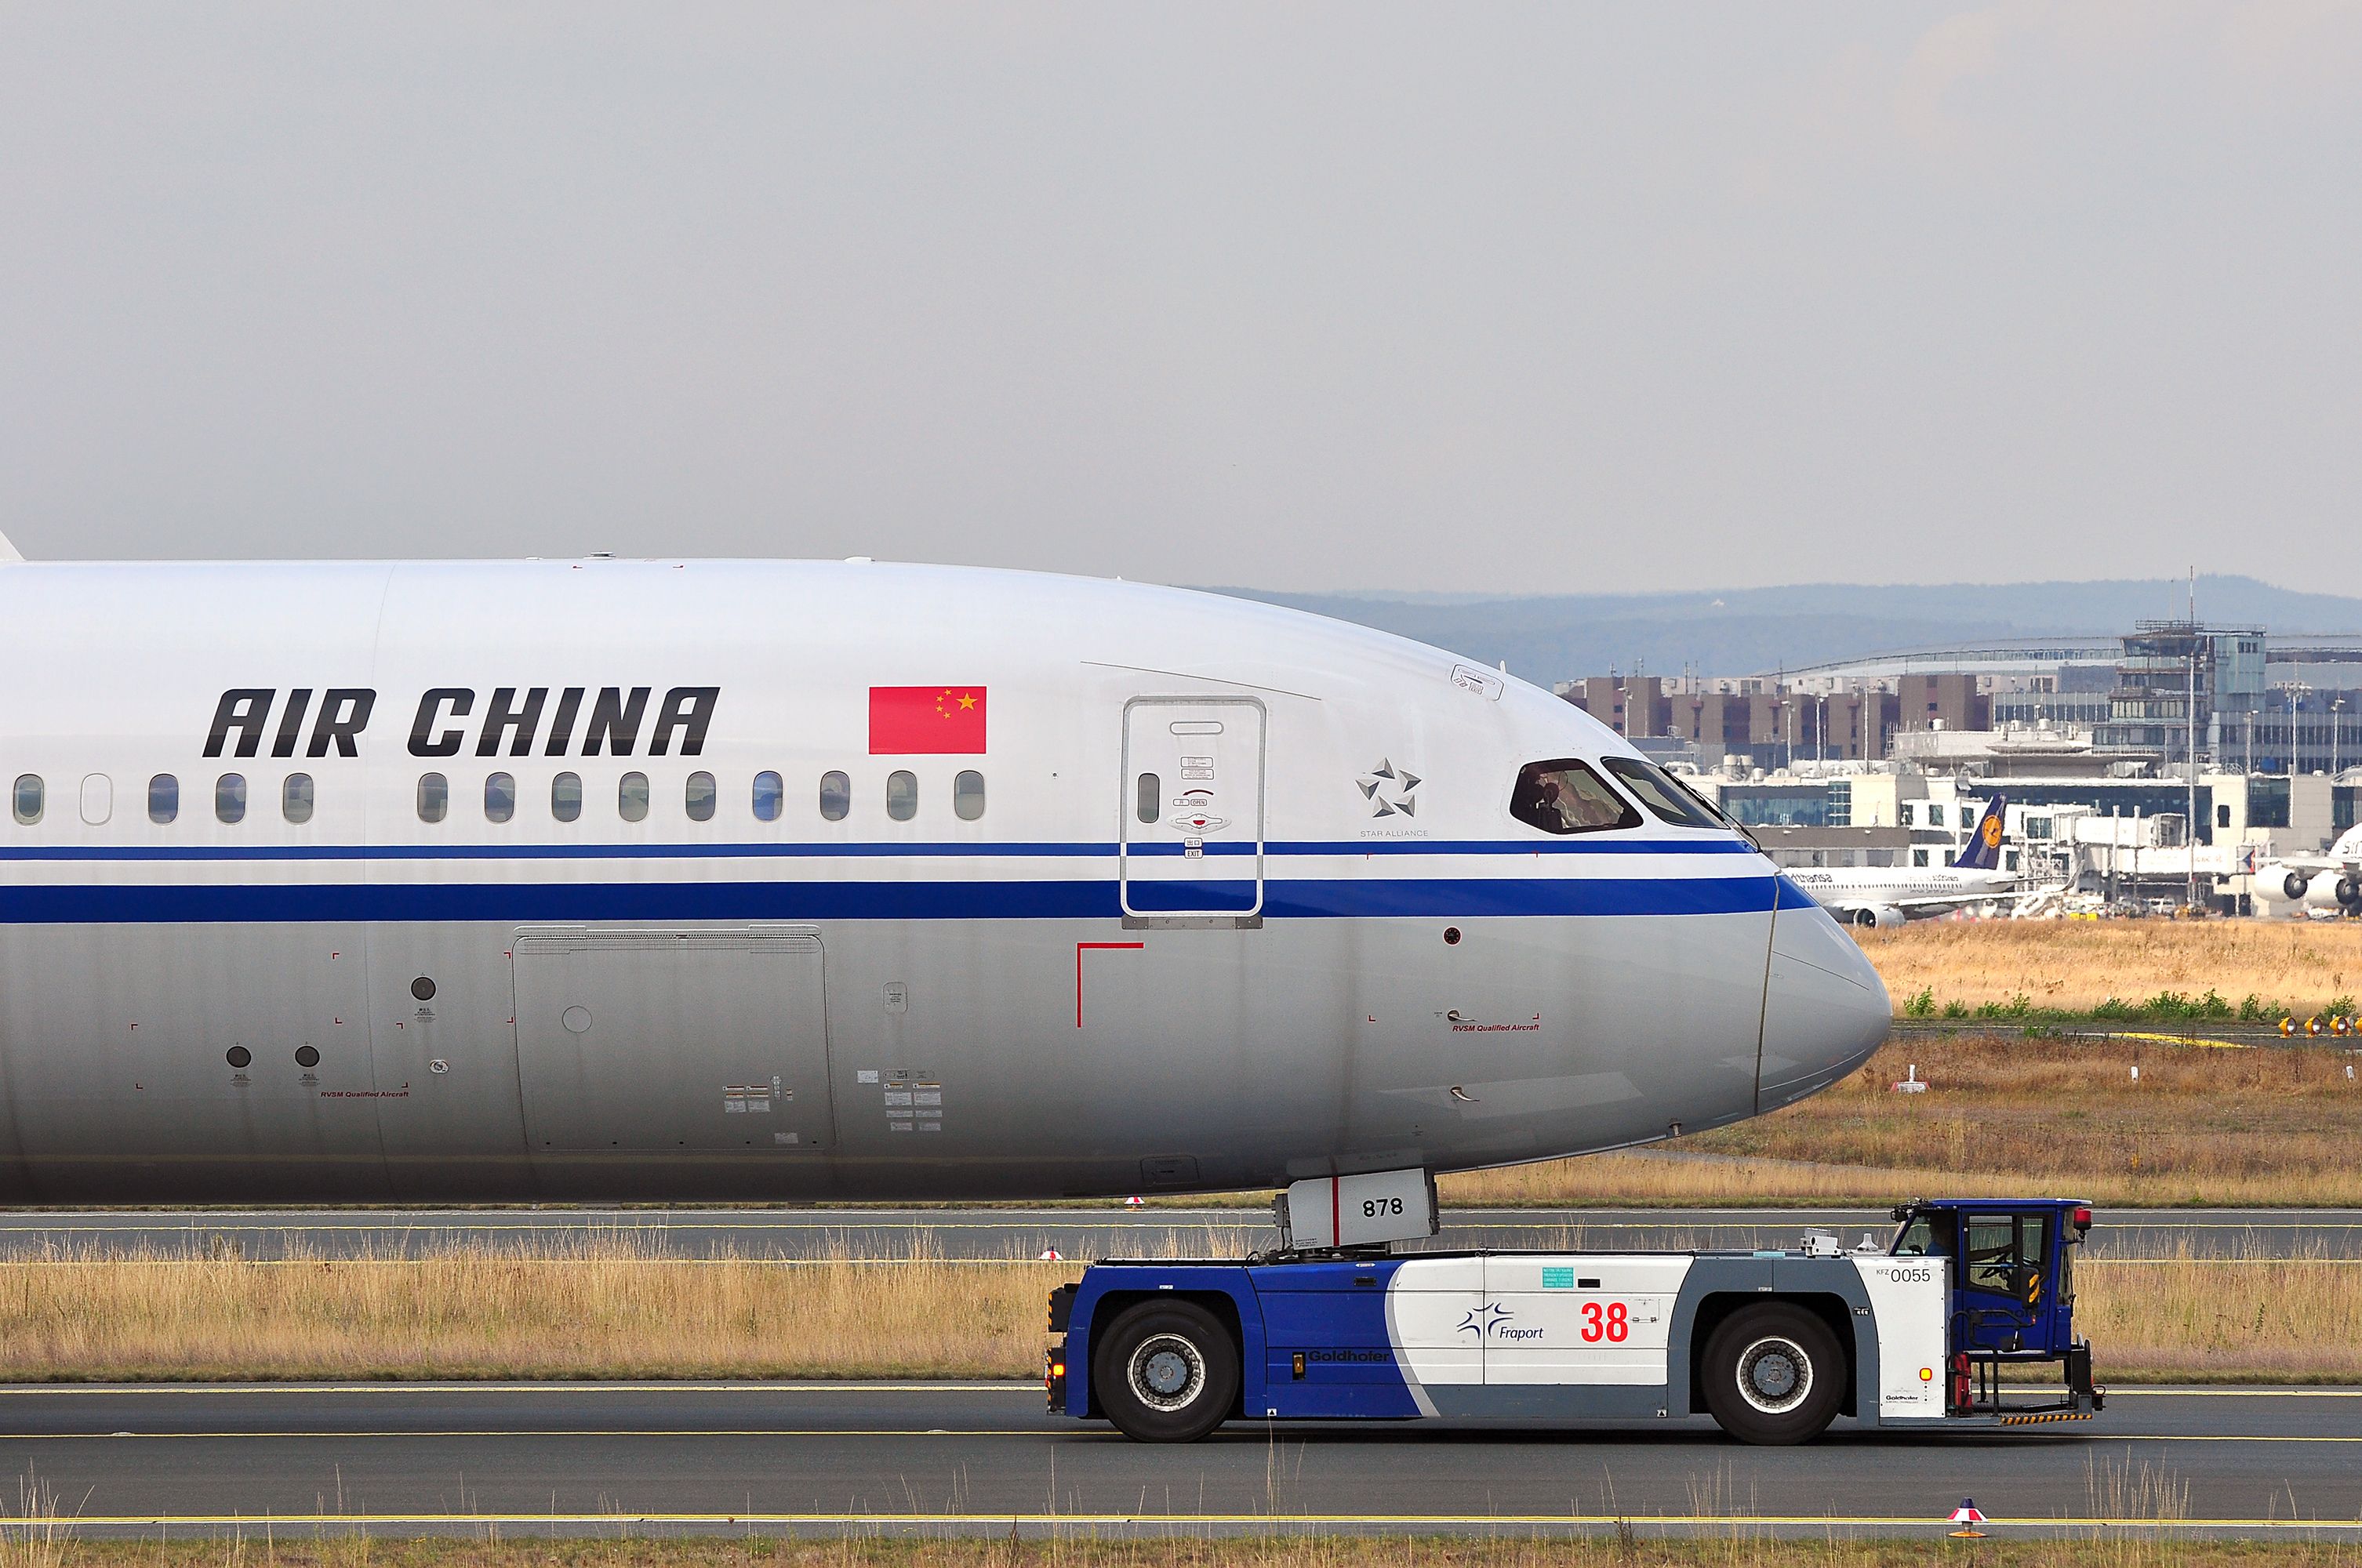 Air China Boeing 787-9 in the Frankfurt airport